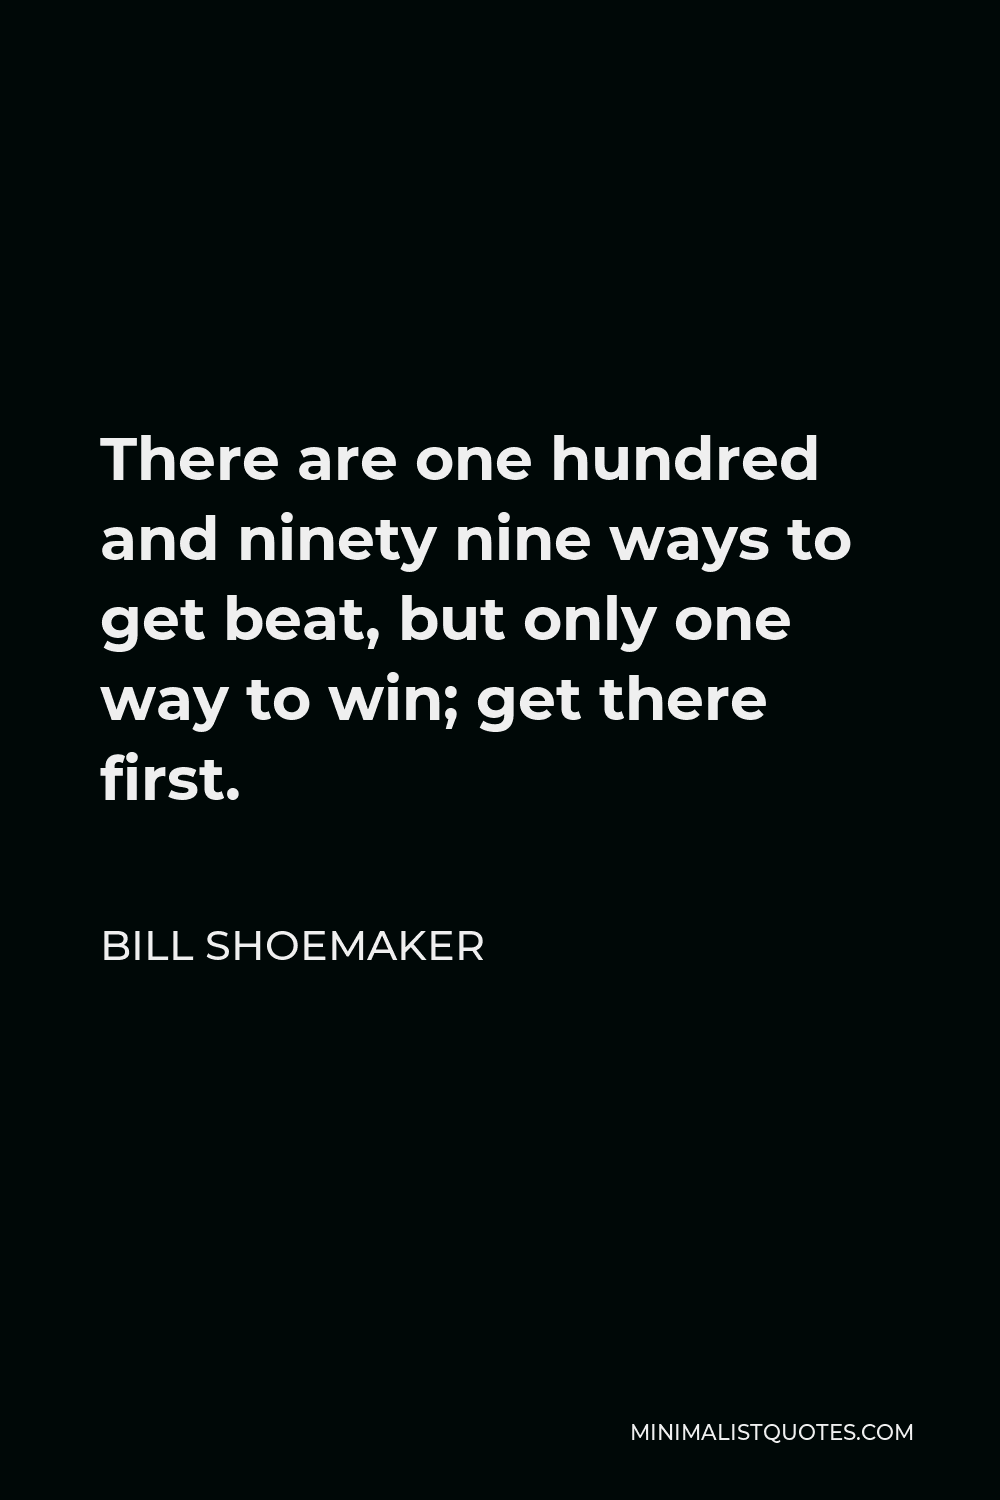 Bill Shoemaker Quote: There are one hundred and ninety nine ways to get ...